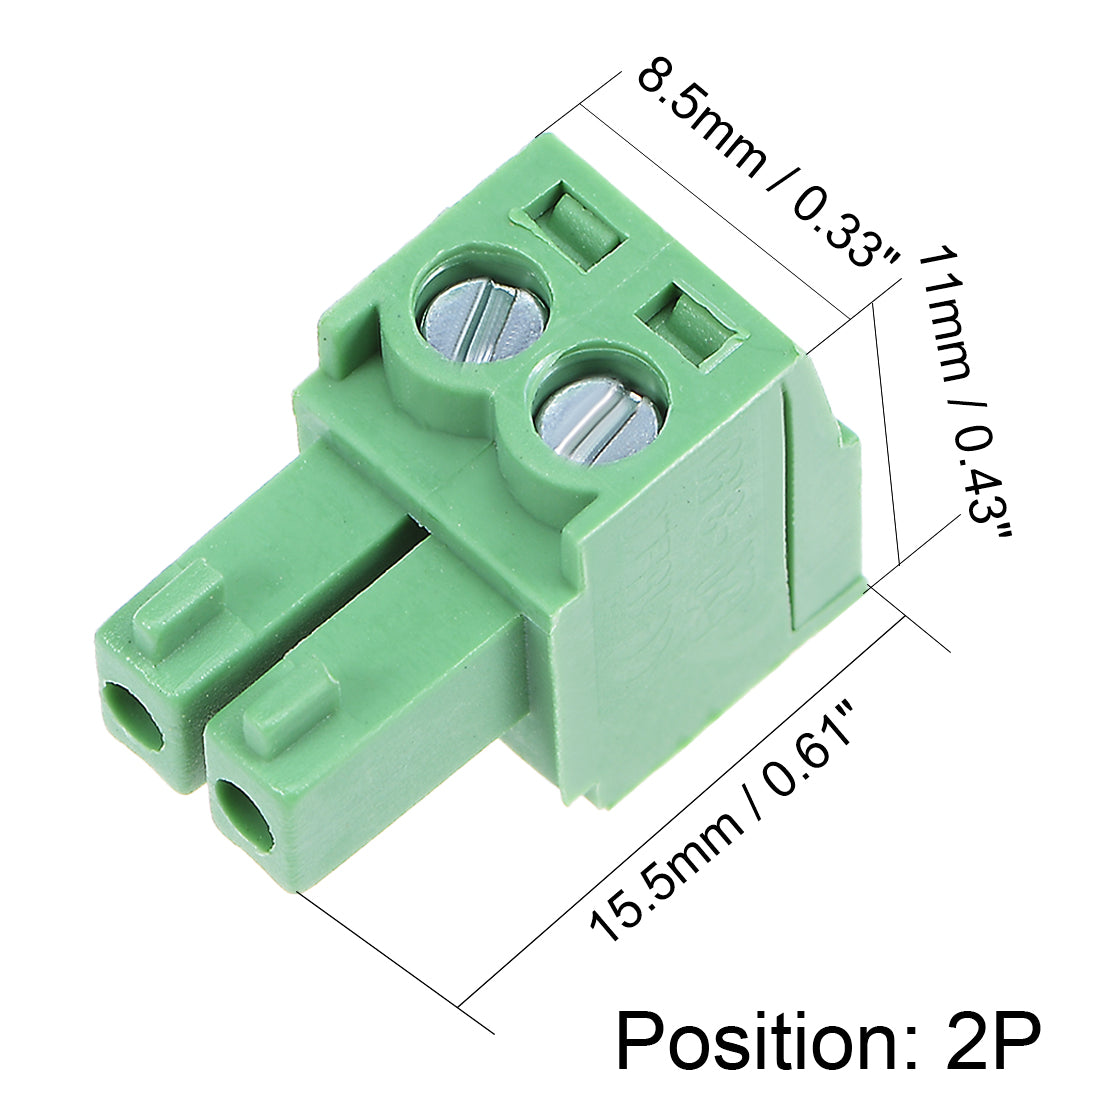 uxcell Uxcell 15Pcs AC300V 10A 3.81mm Pitch 2P Needle Seat Insert-In PCB Terminal Block green